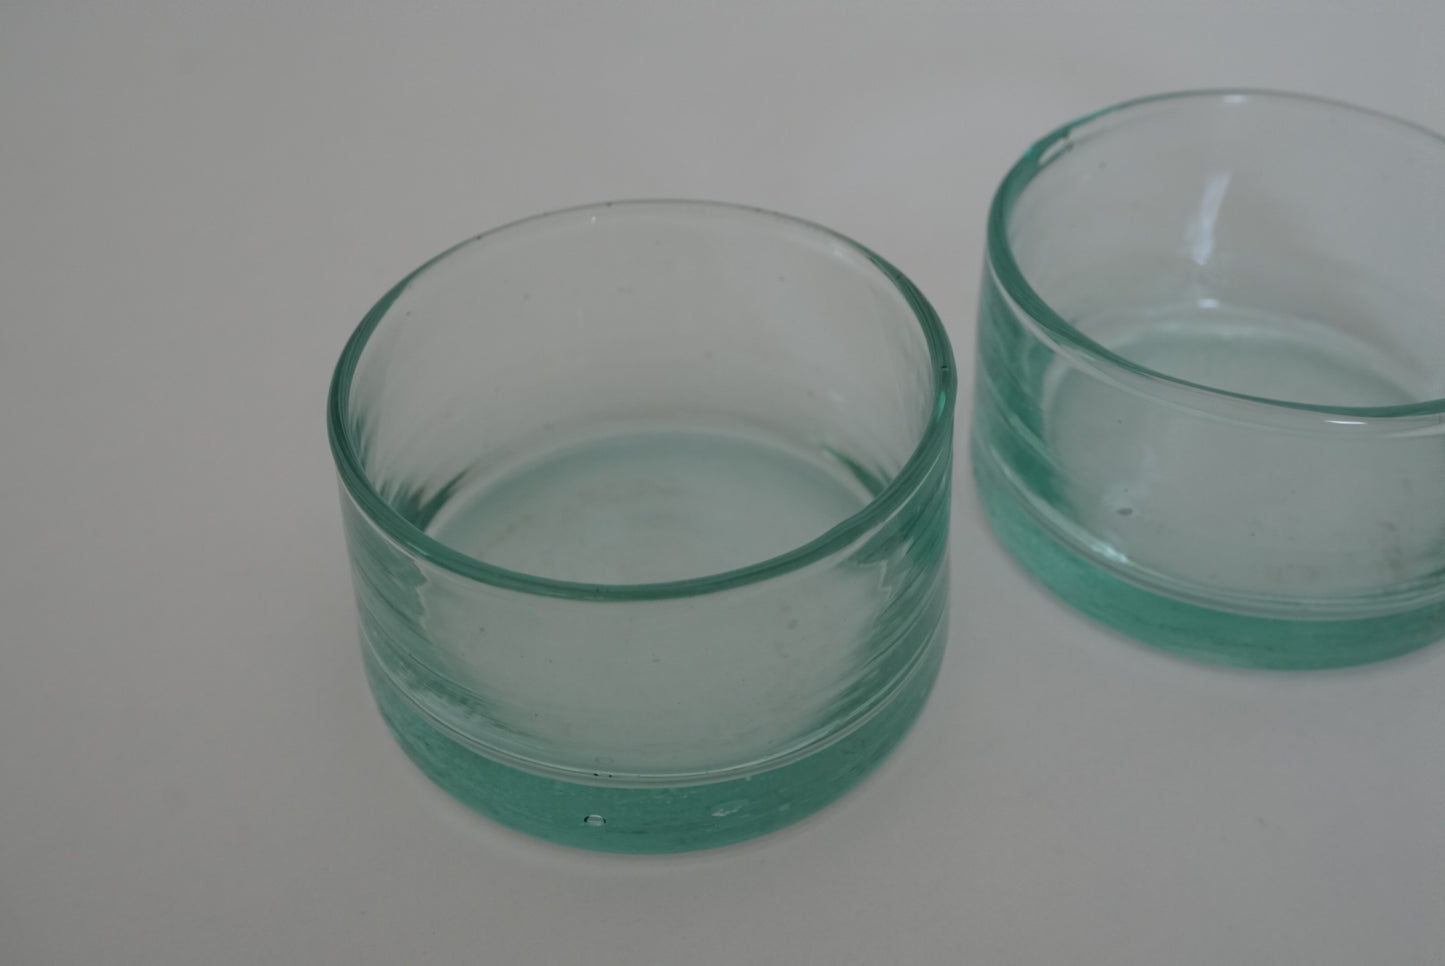 MOROCCO / Recycled glass / D / set of 2